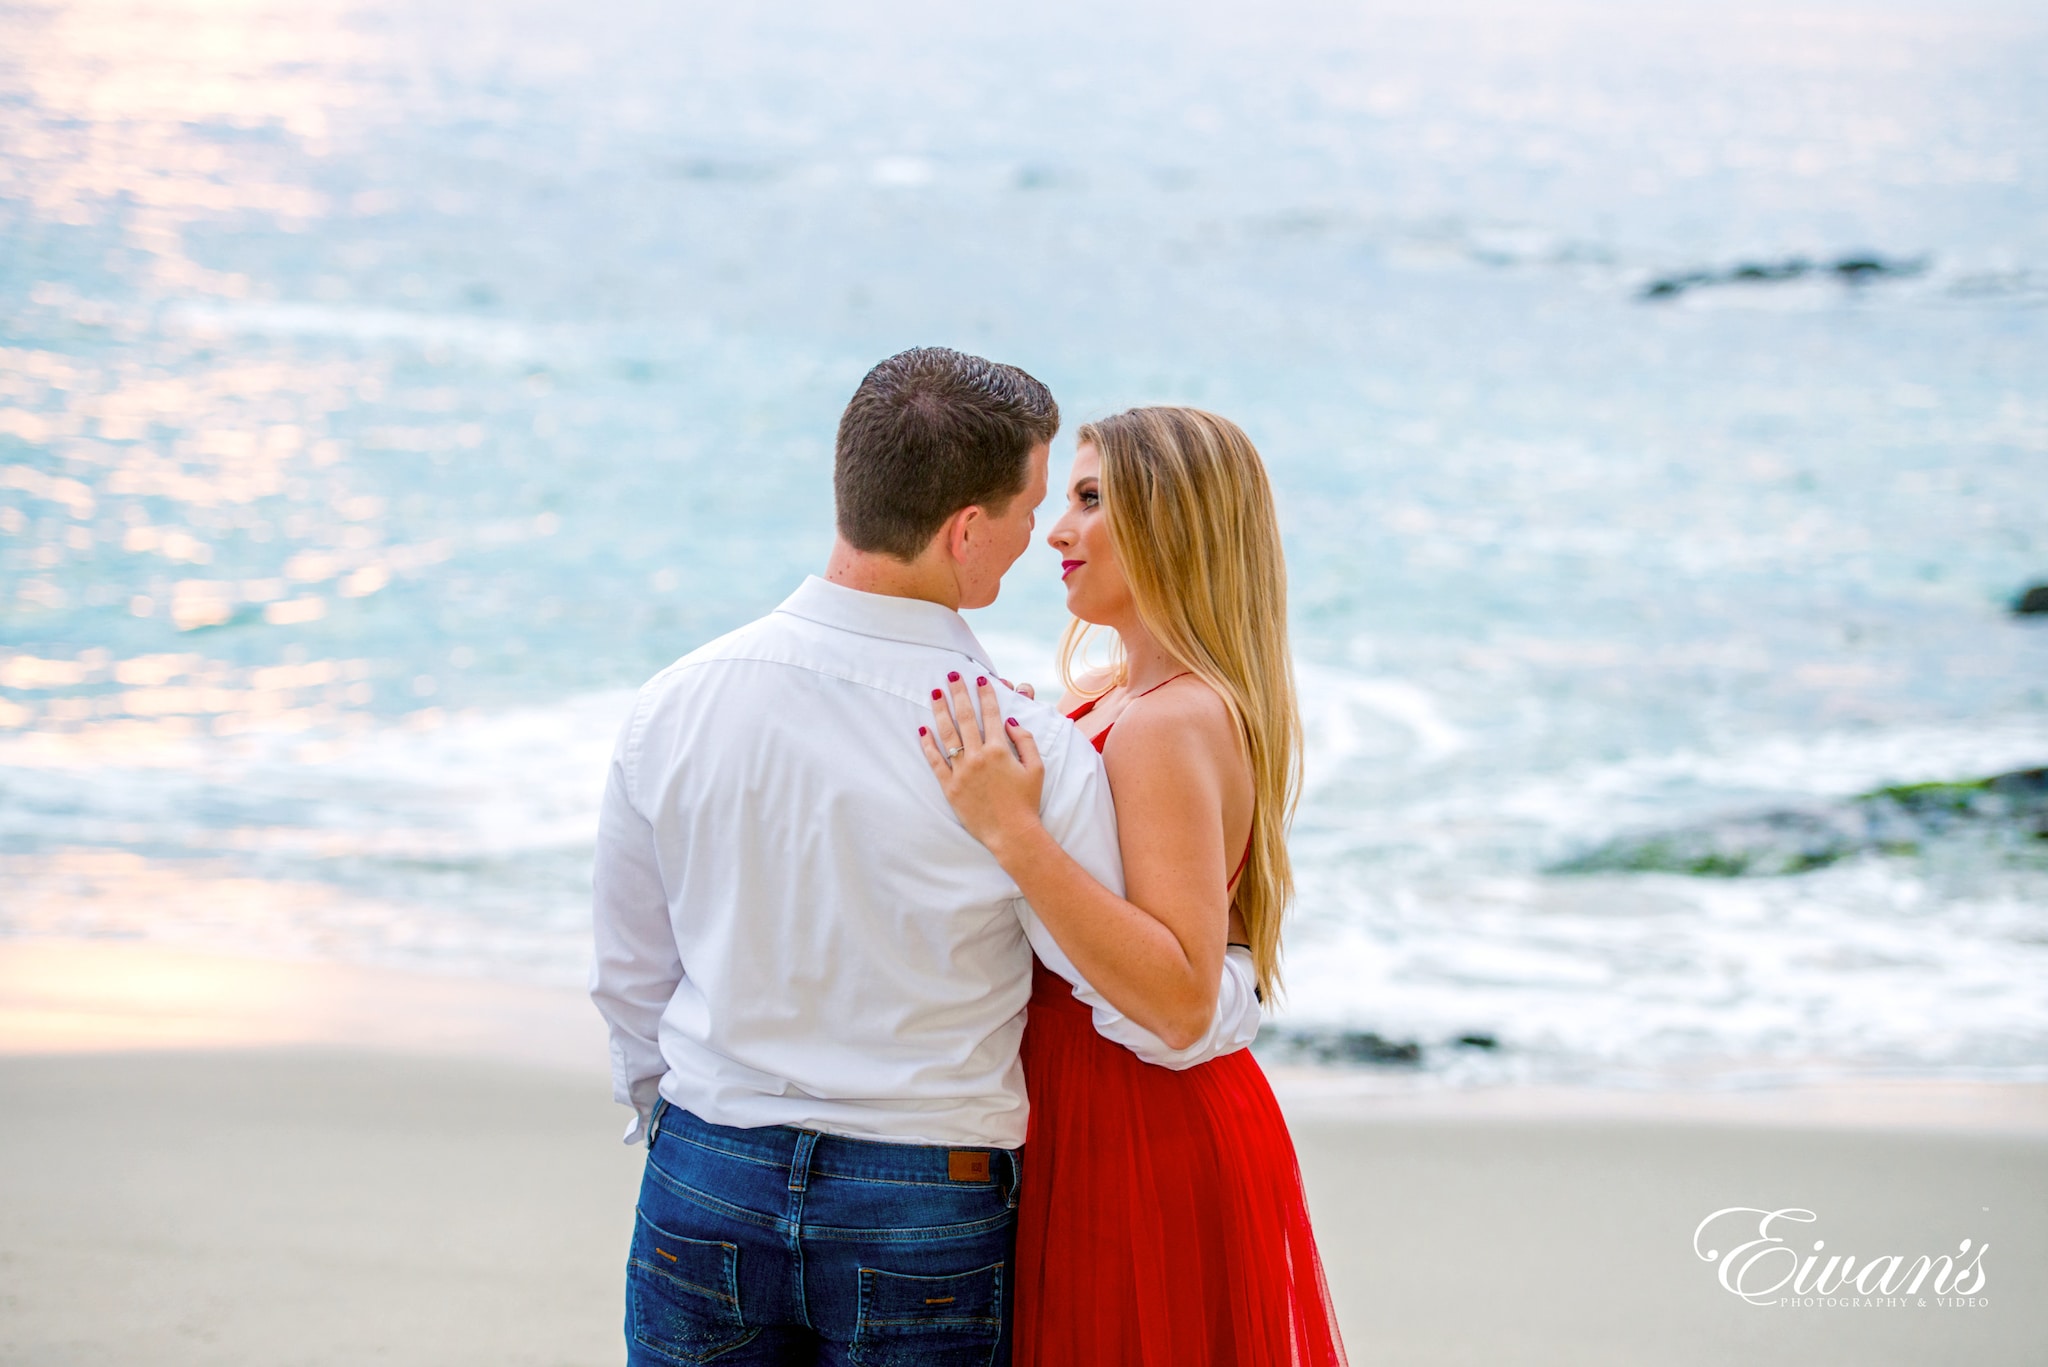 man in white shirt kissing woman in red dress on beach during daytime